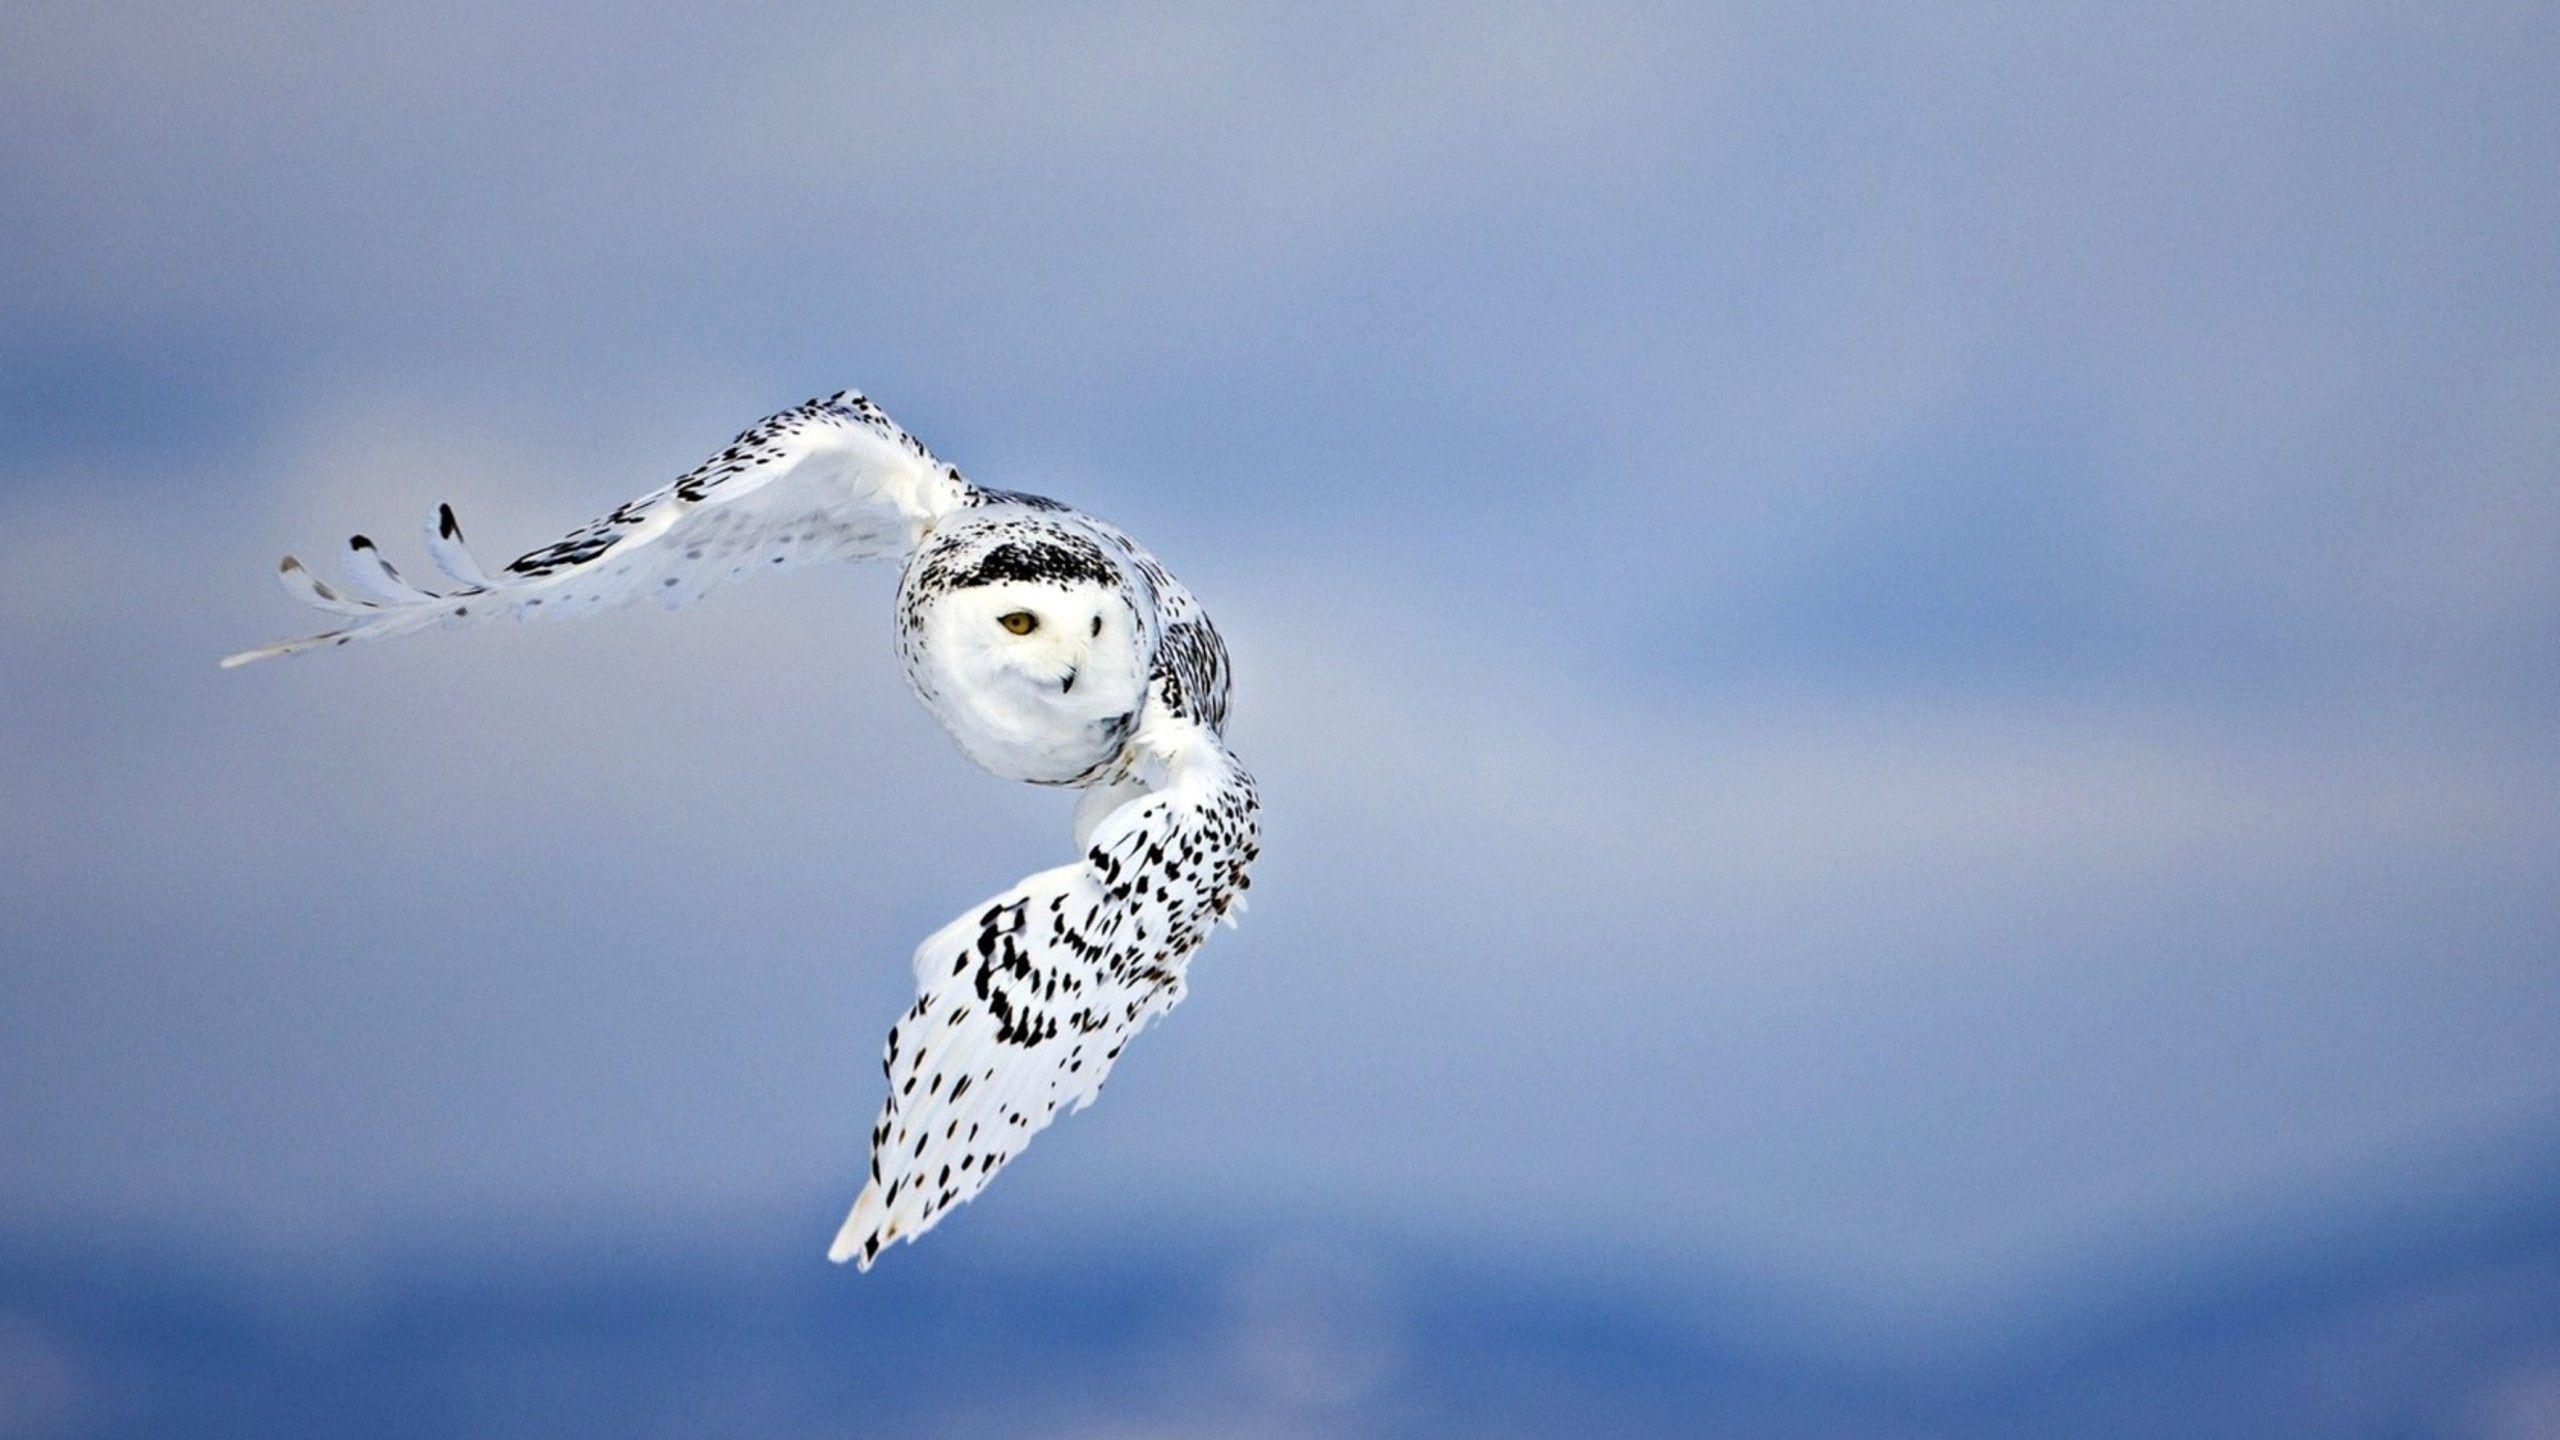 Flying Birds Wallpapers - Top Free Flying Birds Backgrounds ...